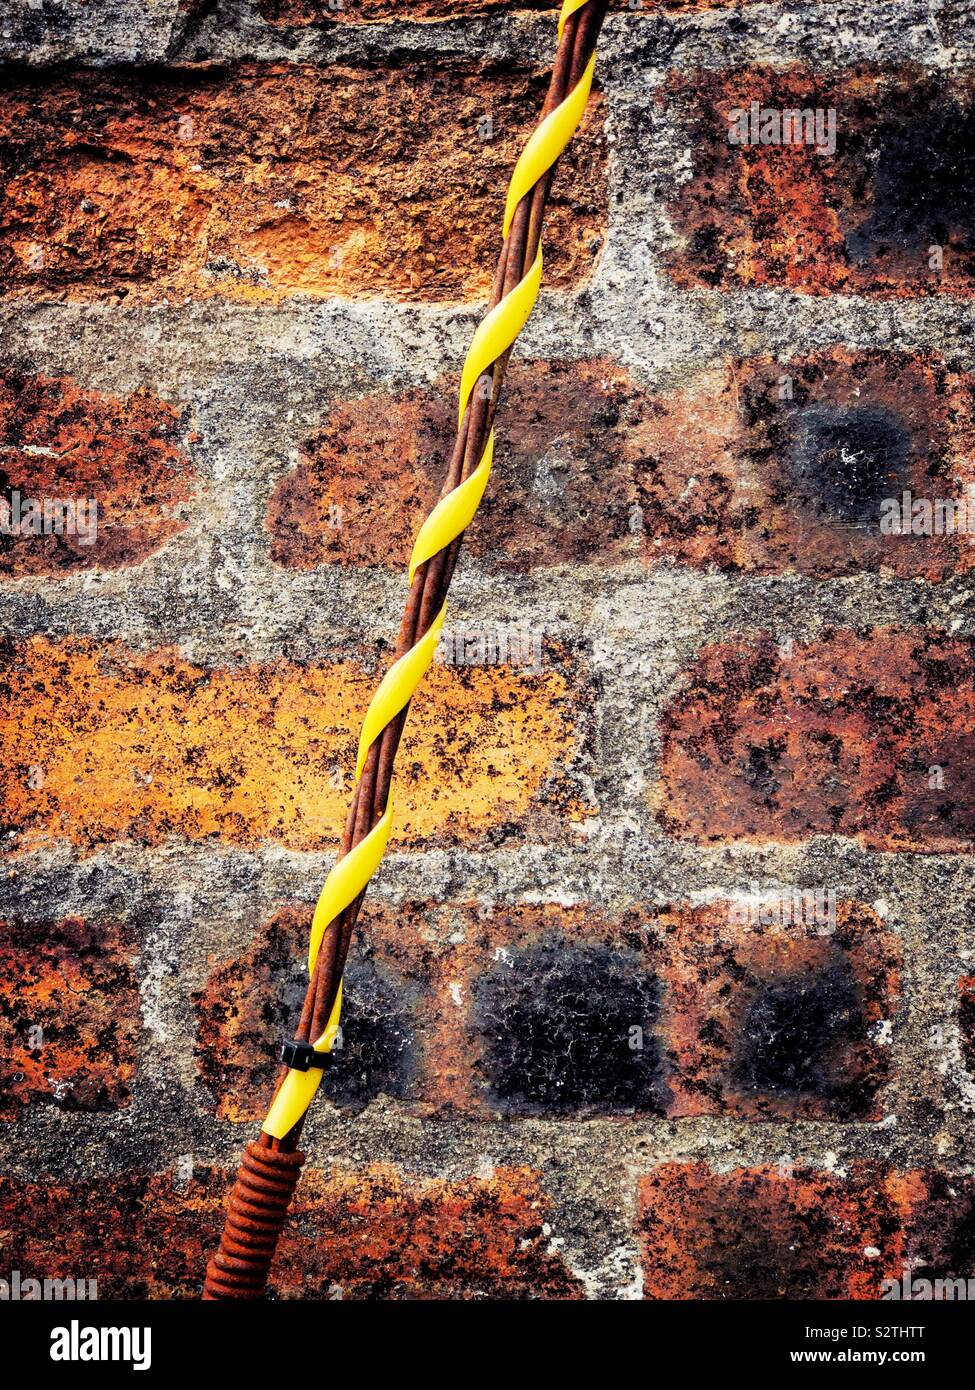 Wire entwined with yellow plastic against a red brick wall. Stock Photo